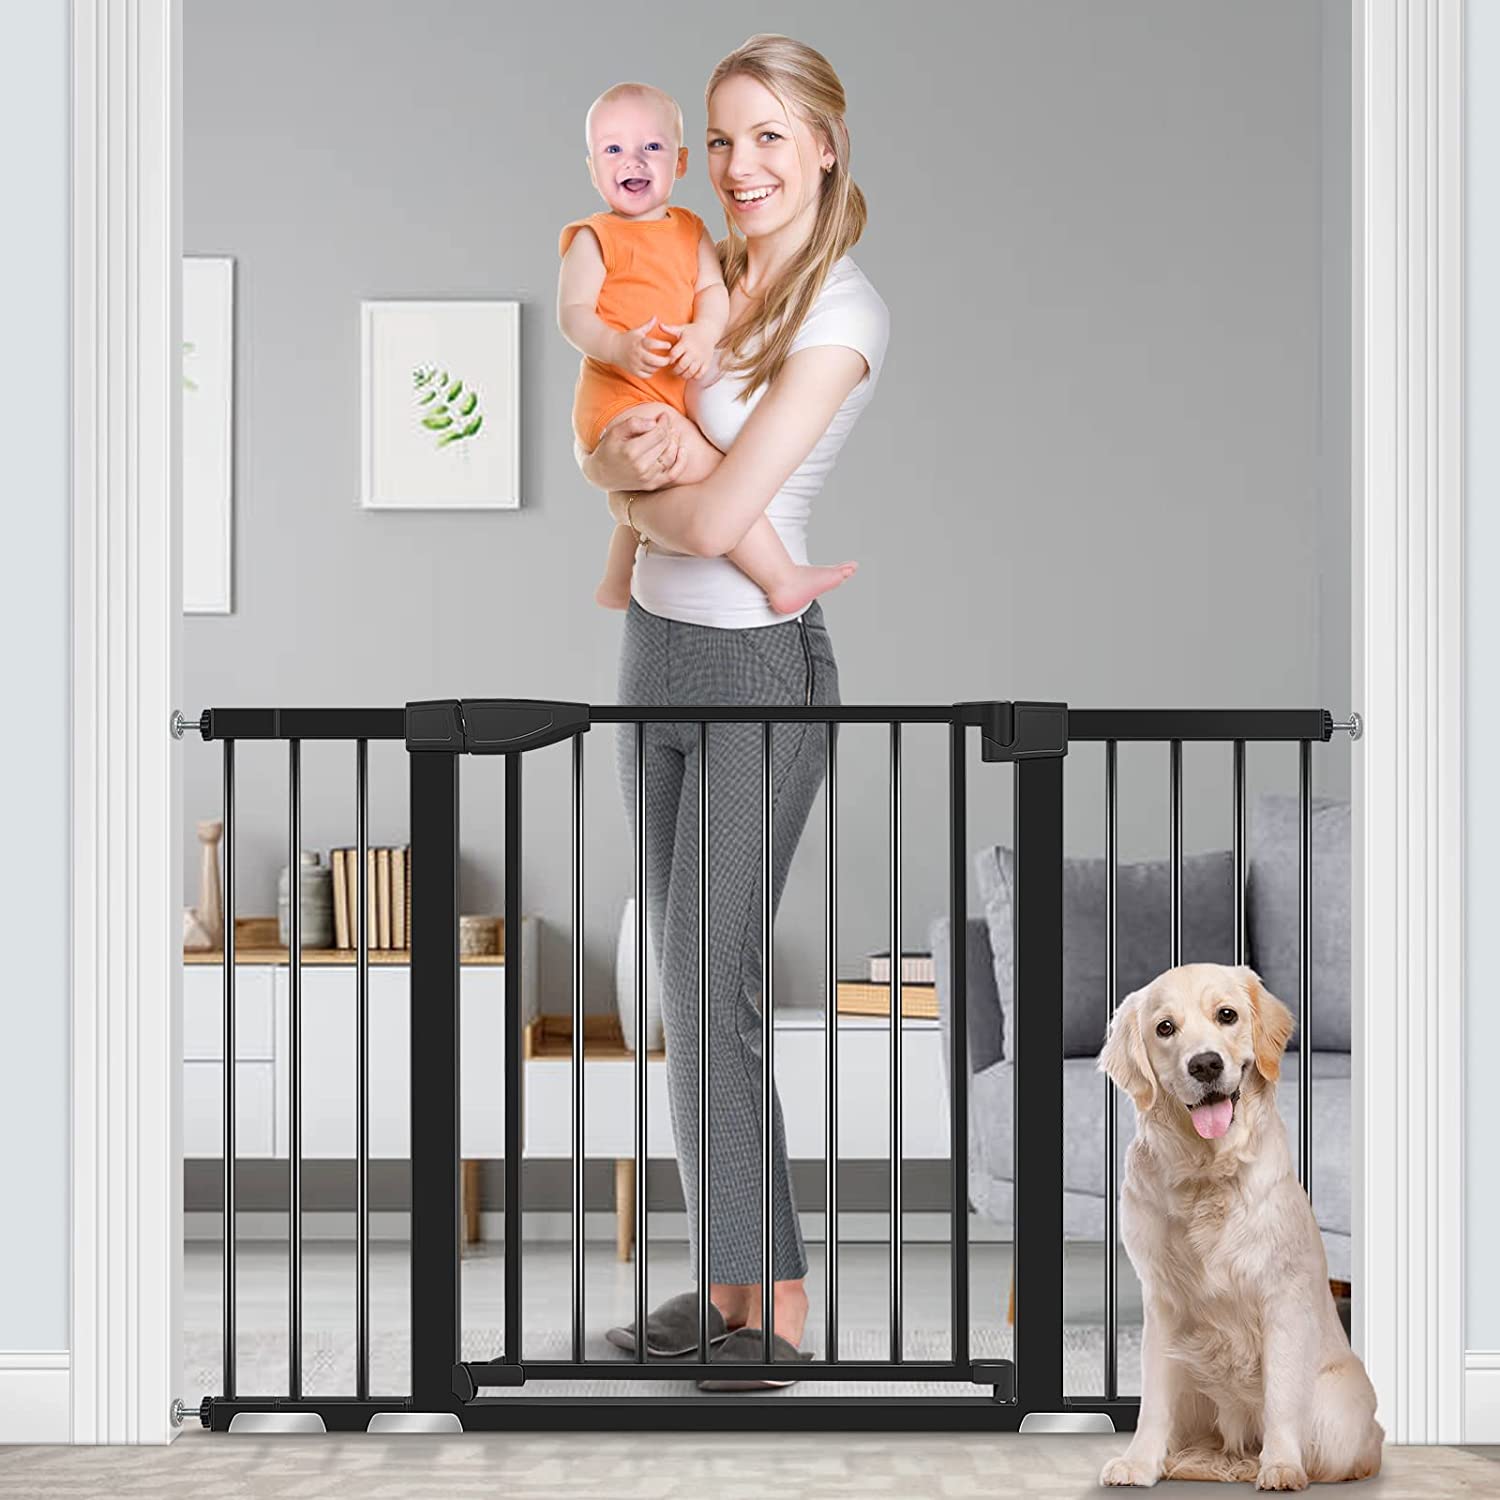 RONBEI Easy Install Extra Wide Pet & Infant Gate, 51.5-Inch